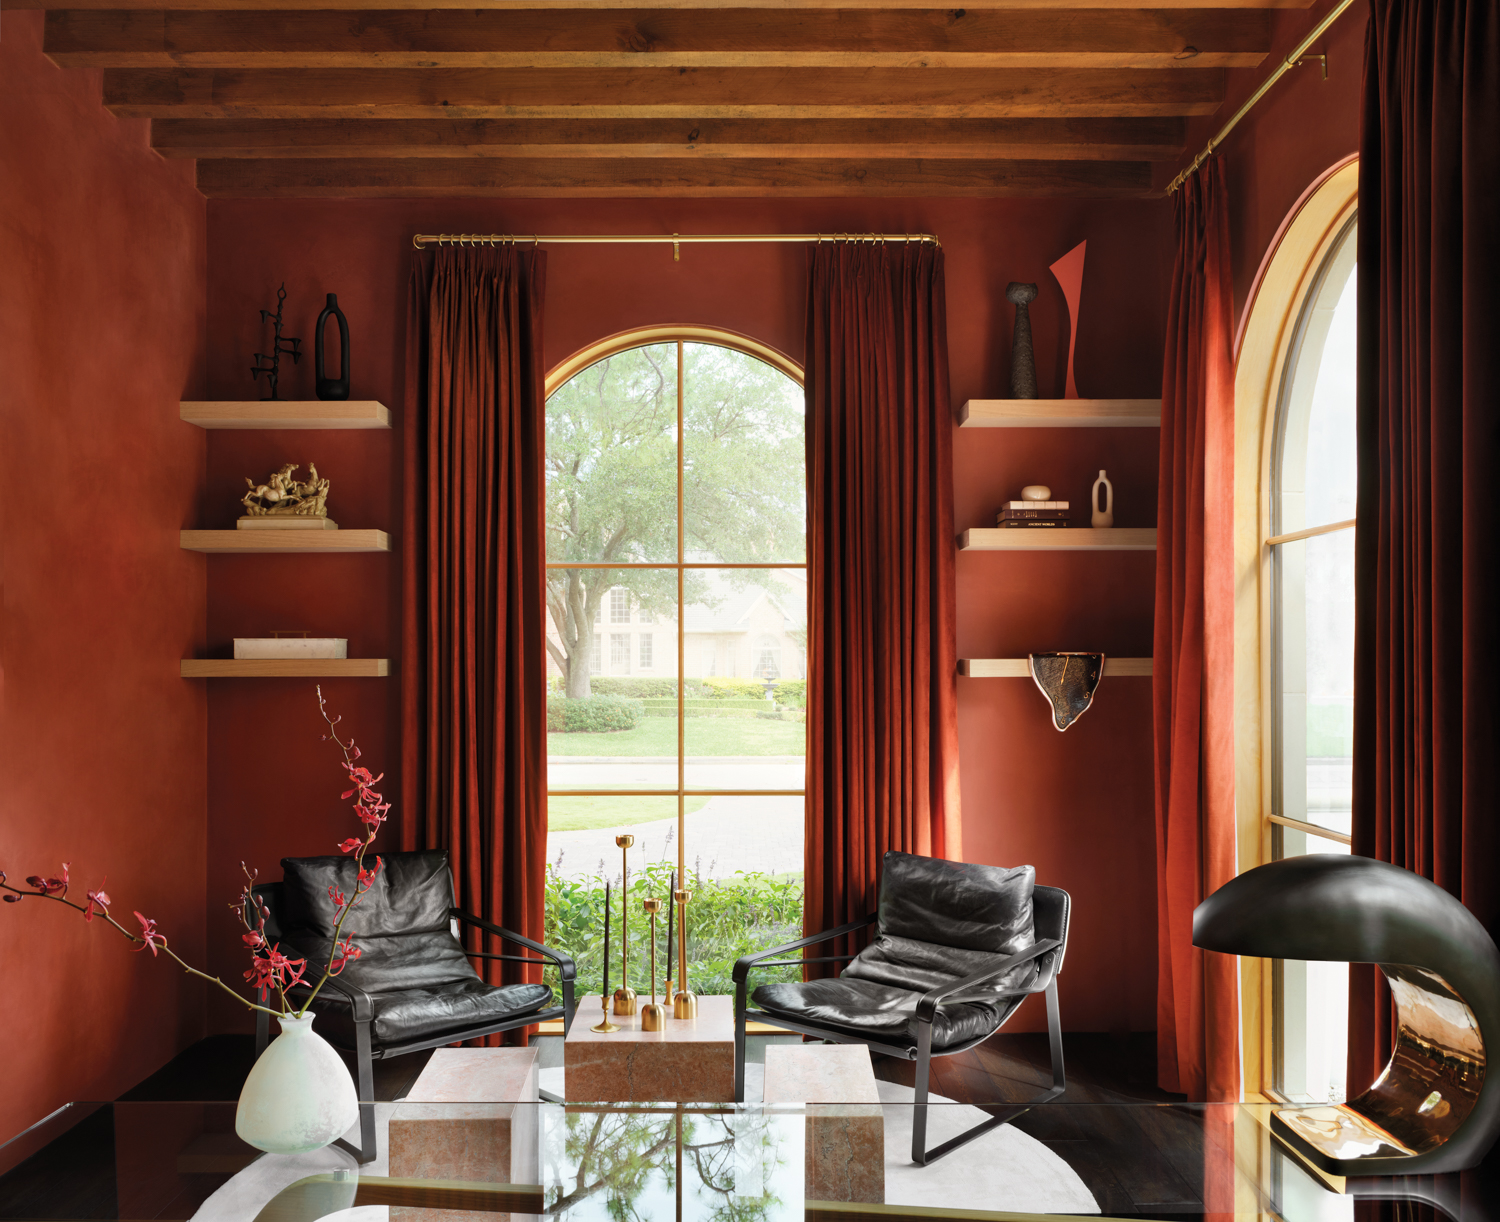 office seating area with beams and Sienna-colored plaster walls